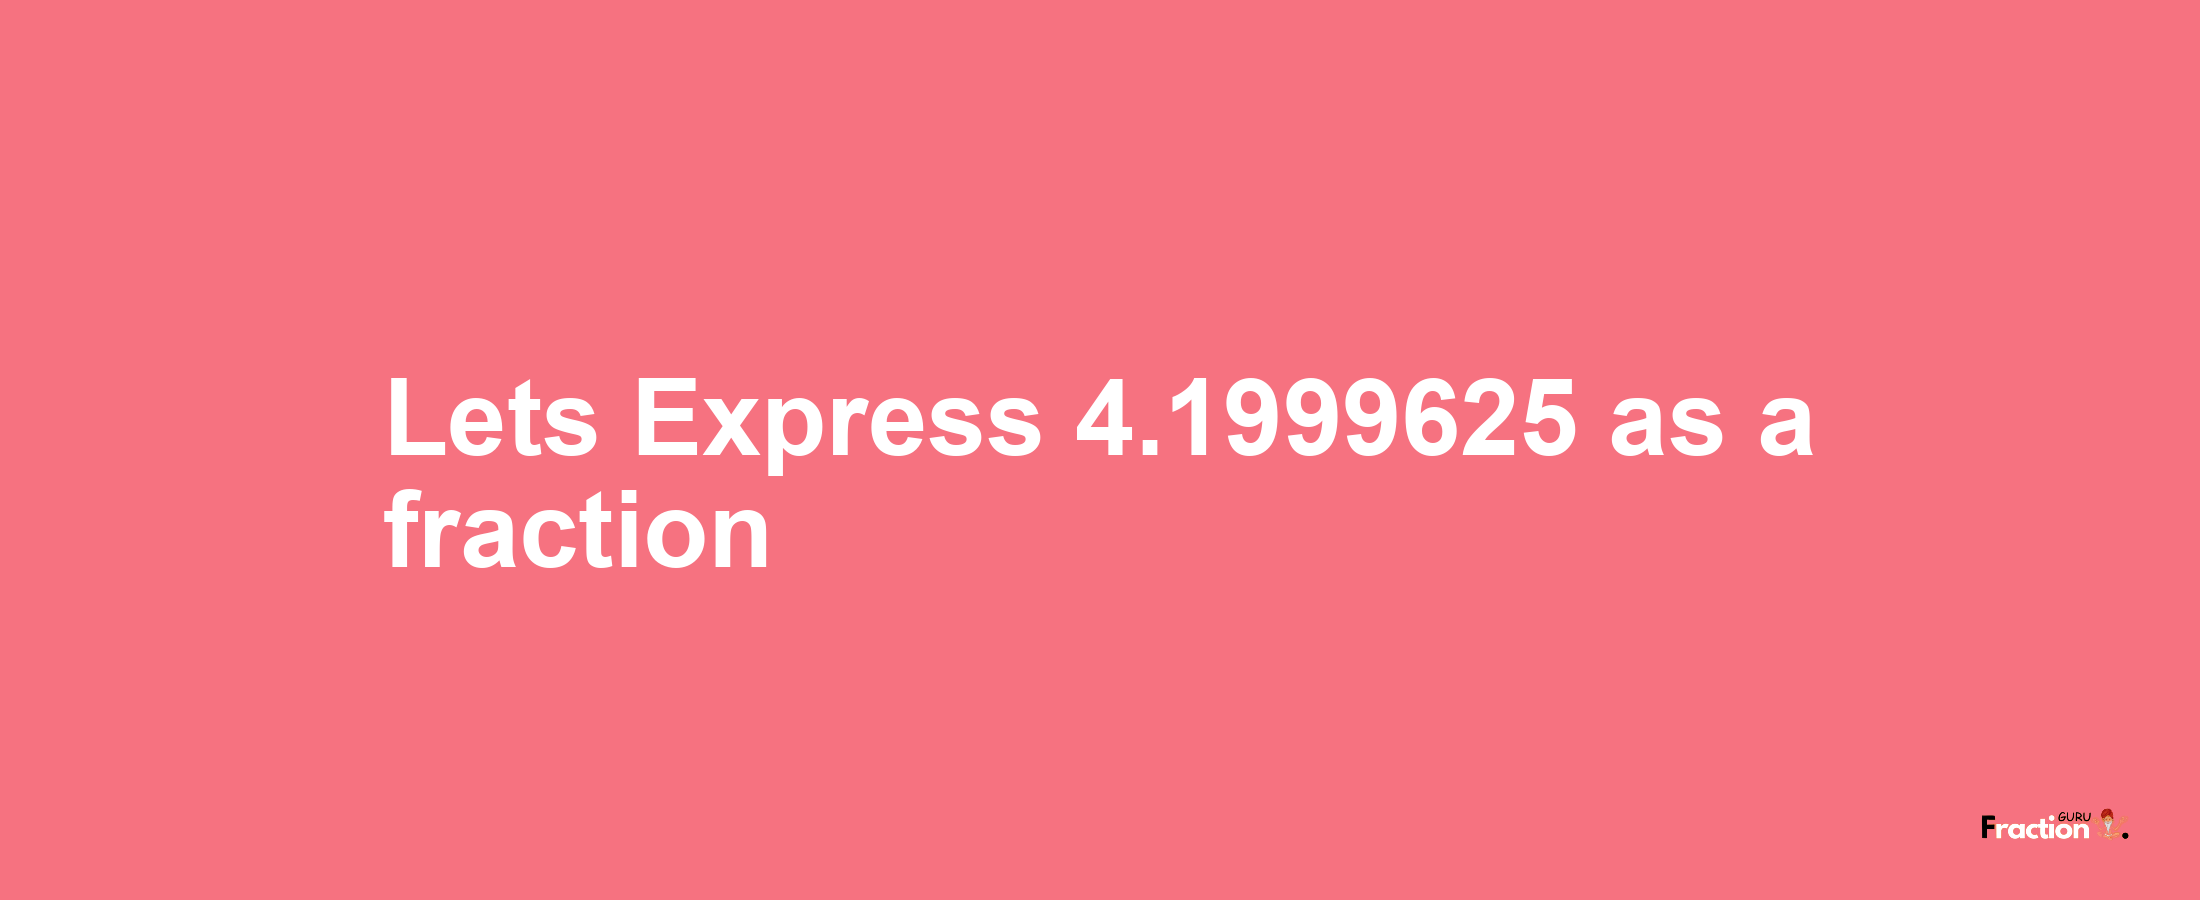 Lets Express 4.1999625 as afraction